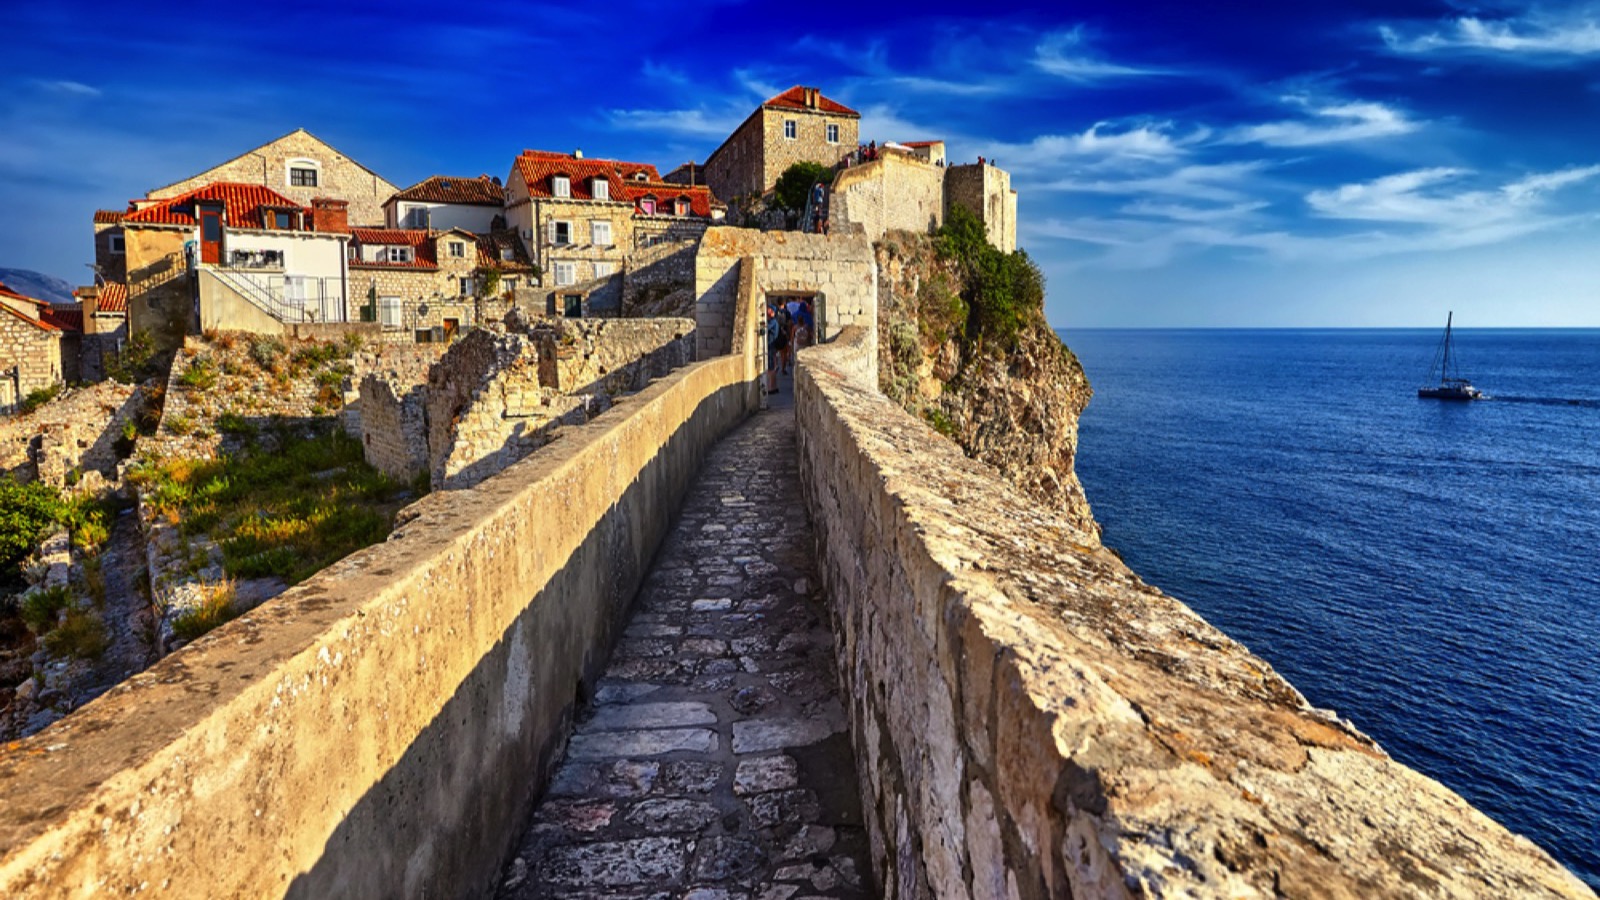 <p>Stunning green islands, crystal clear waters, and majestic mountains are some of the elements that make Dubrovnik beautiful. It also comes with world-class culture and historic architectural buildings. If you want to relax, you can kick back on the beaches or search for treasures by the sea.</p>